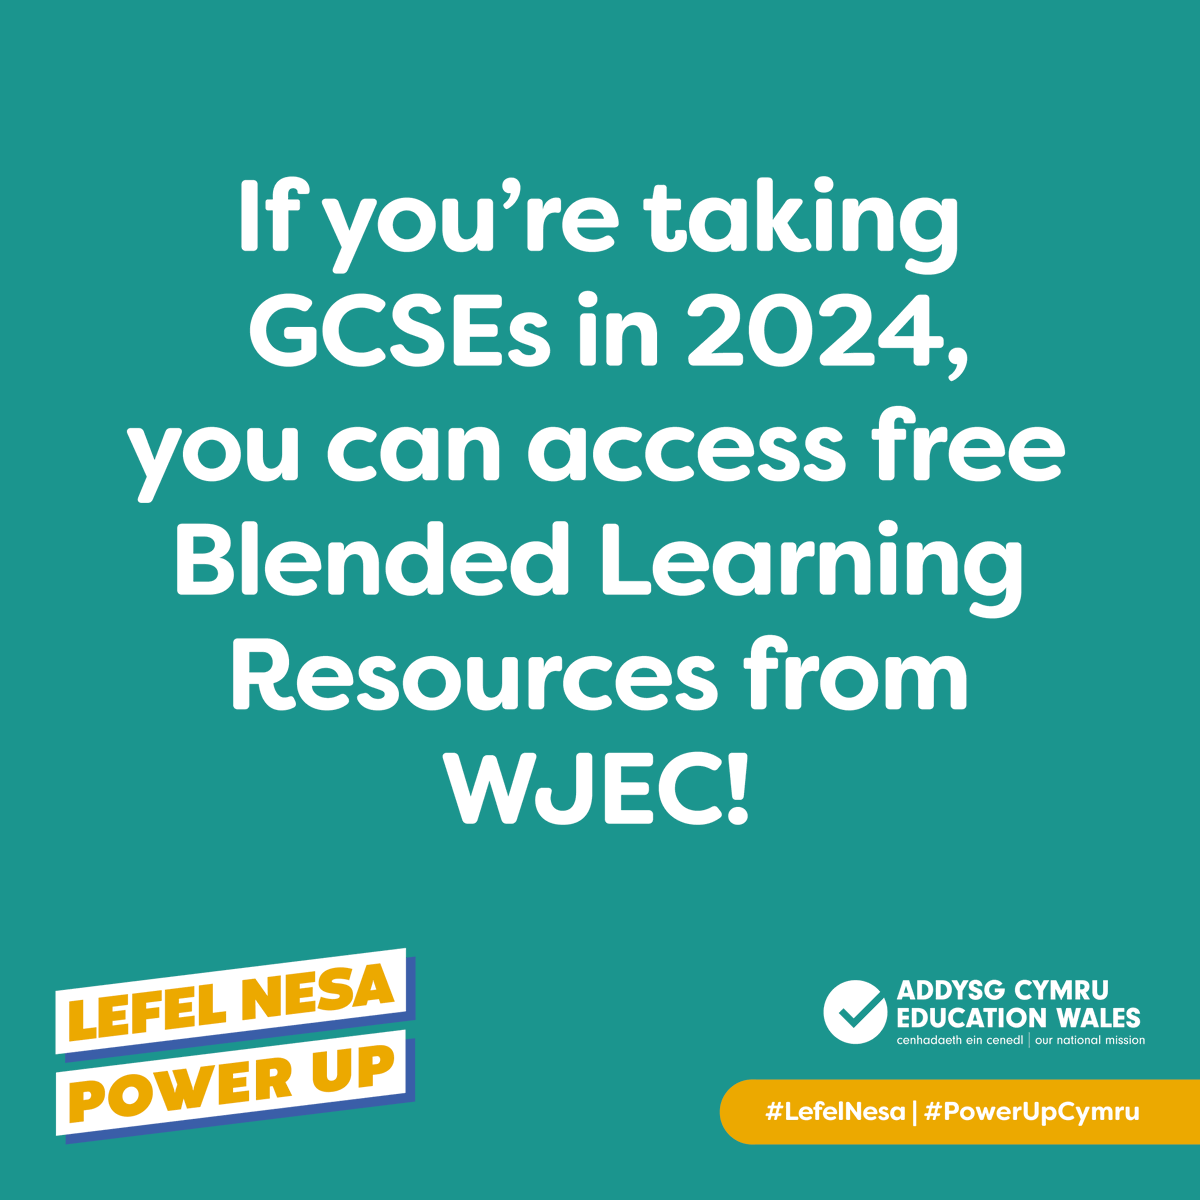 Are you taking GCSEs this year? WJEC’s Blended Learning Resources cover a wide range of subjects and can help elevate your learning! Head to gov.wales/powerup to find out more. #PowerUpCymru